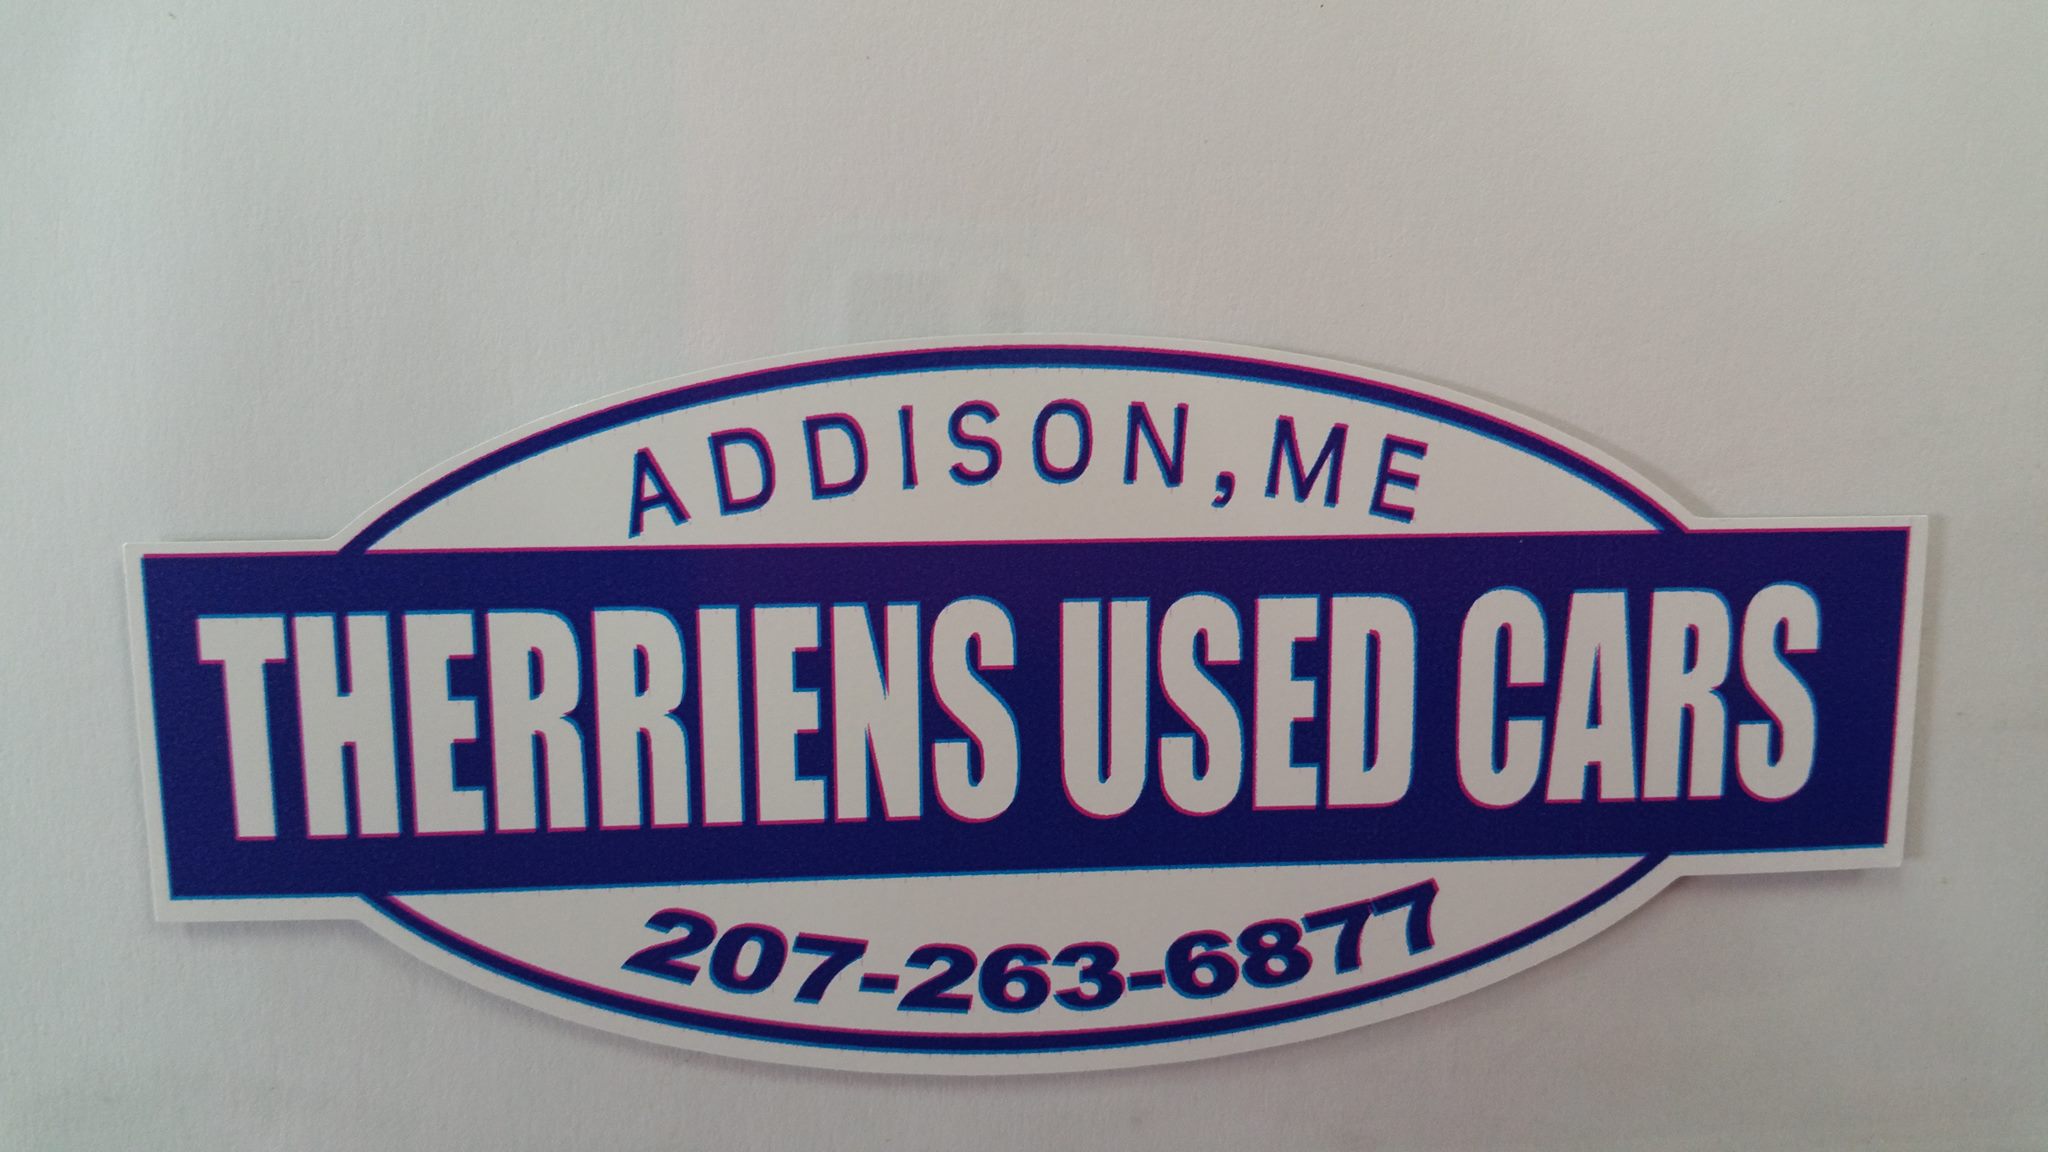 Therriens used cars Towing & Recycling LLC